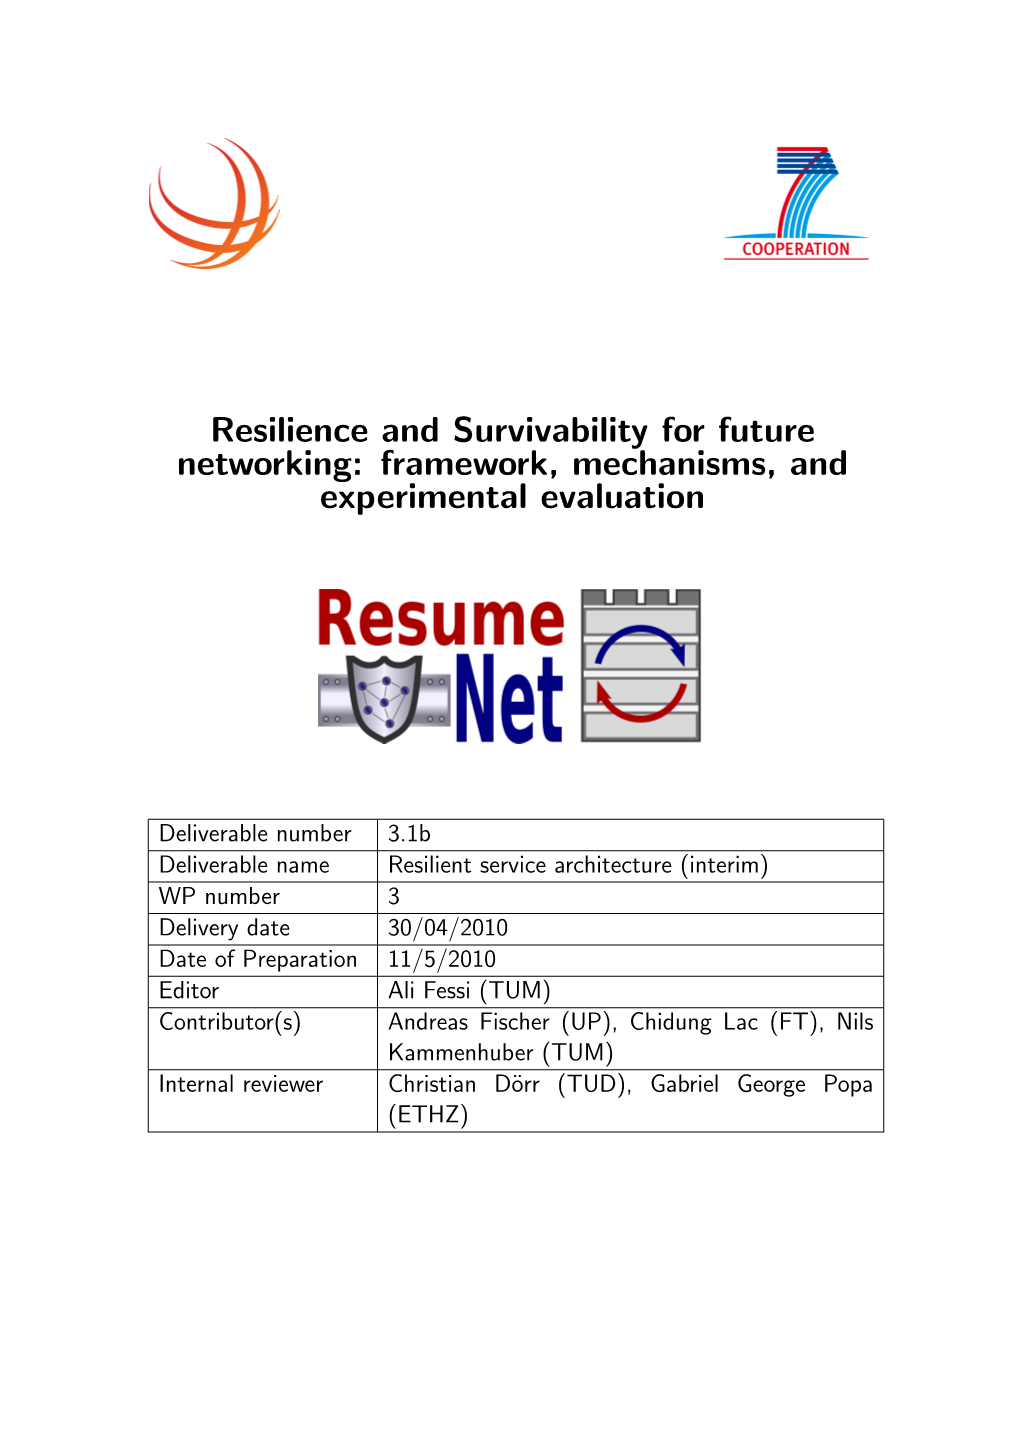 Resilience and Survivability for Future Networking: Framework, Mechanisms, and Experimental Evaluation